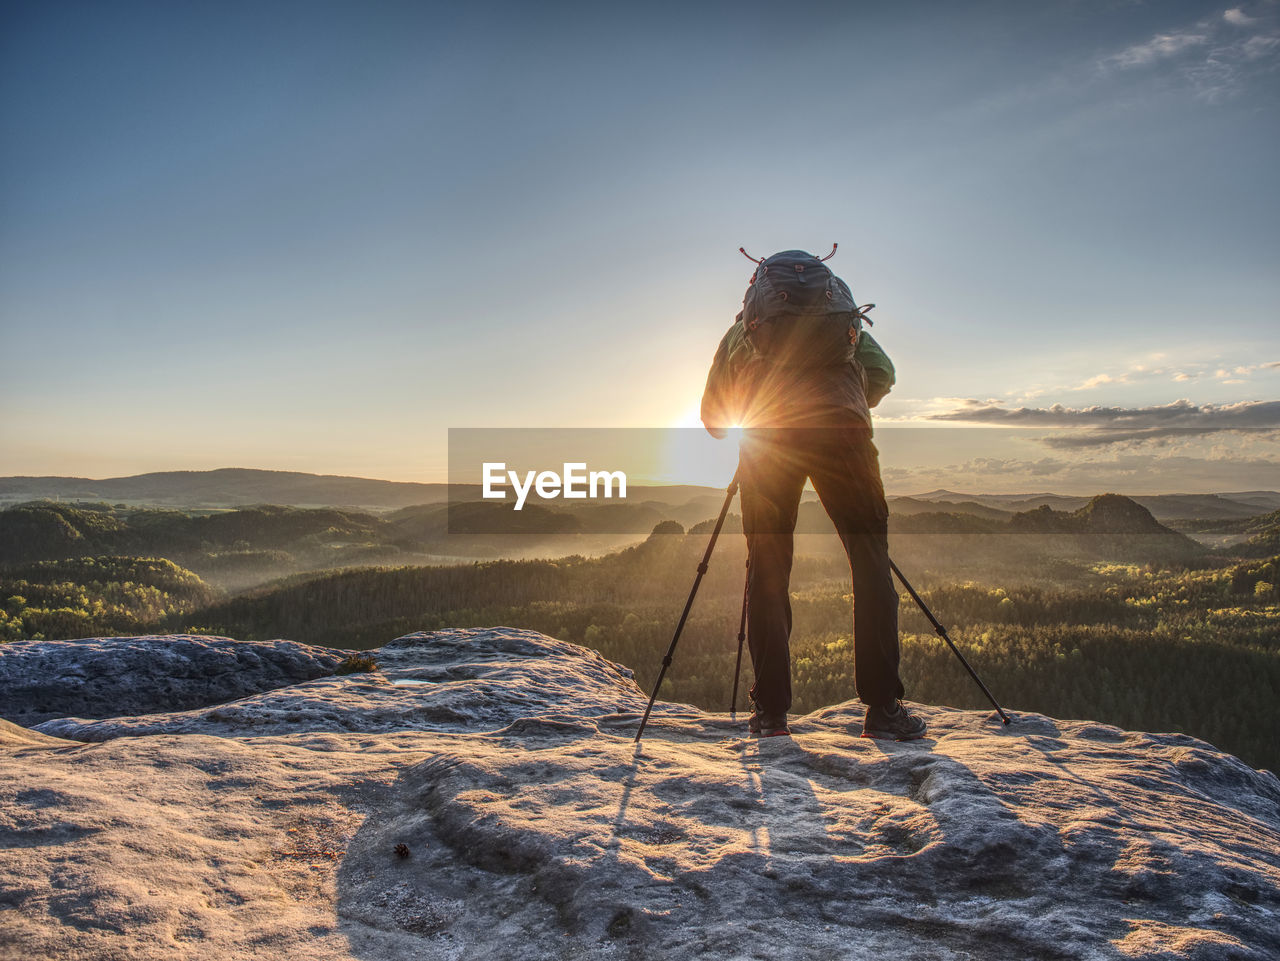 Artist set camera and tripod to photograph the sunrise on a rocky summit. artist works in nature